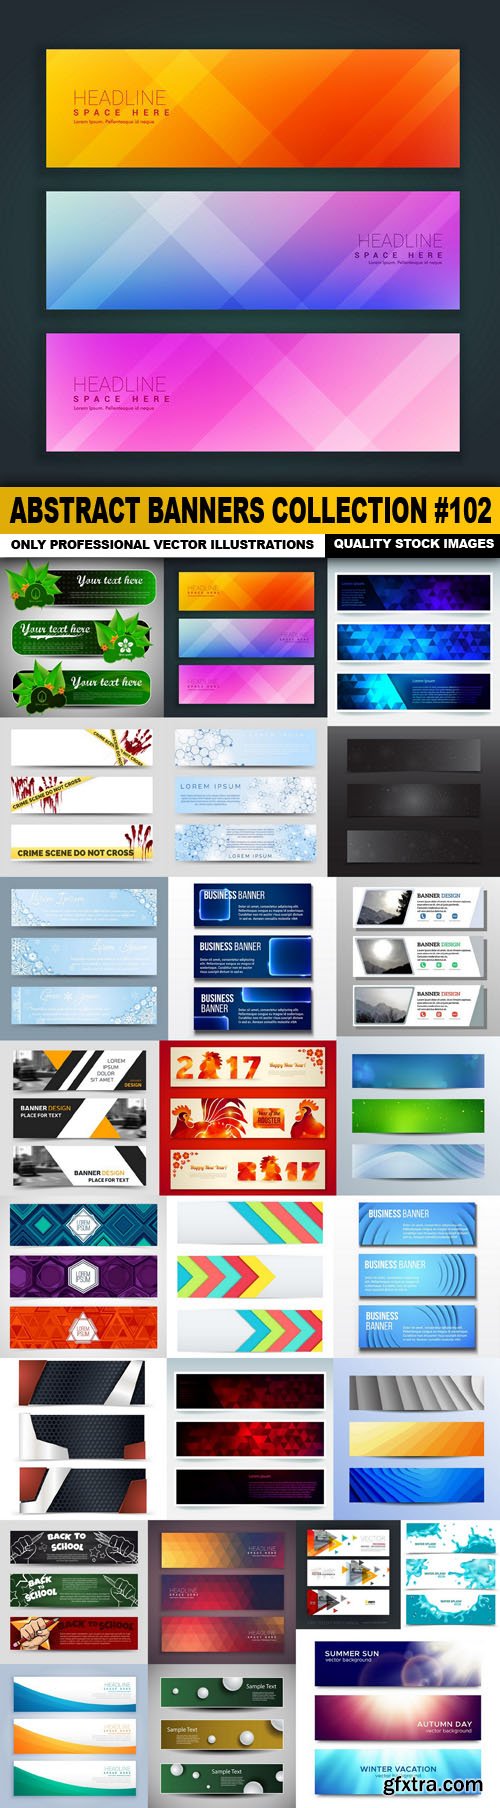 Abstract Banners Collection #102 - 25 Vectors